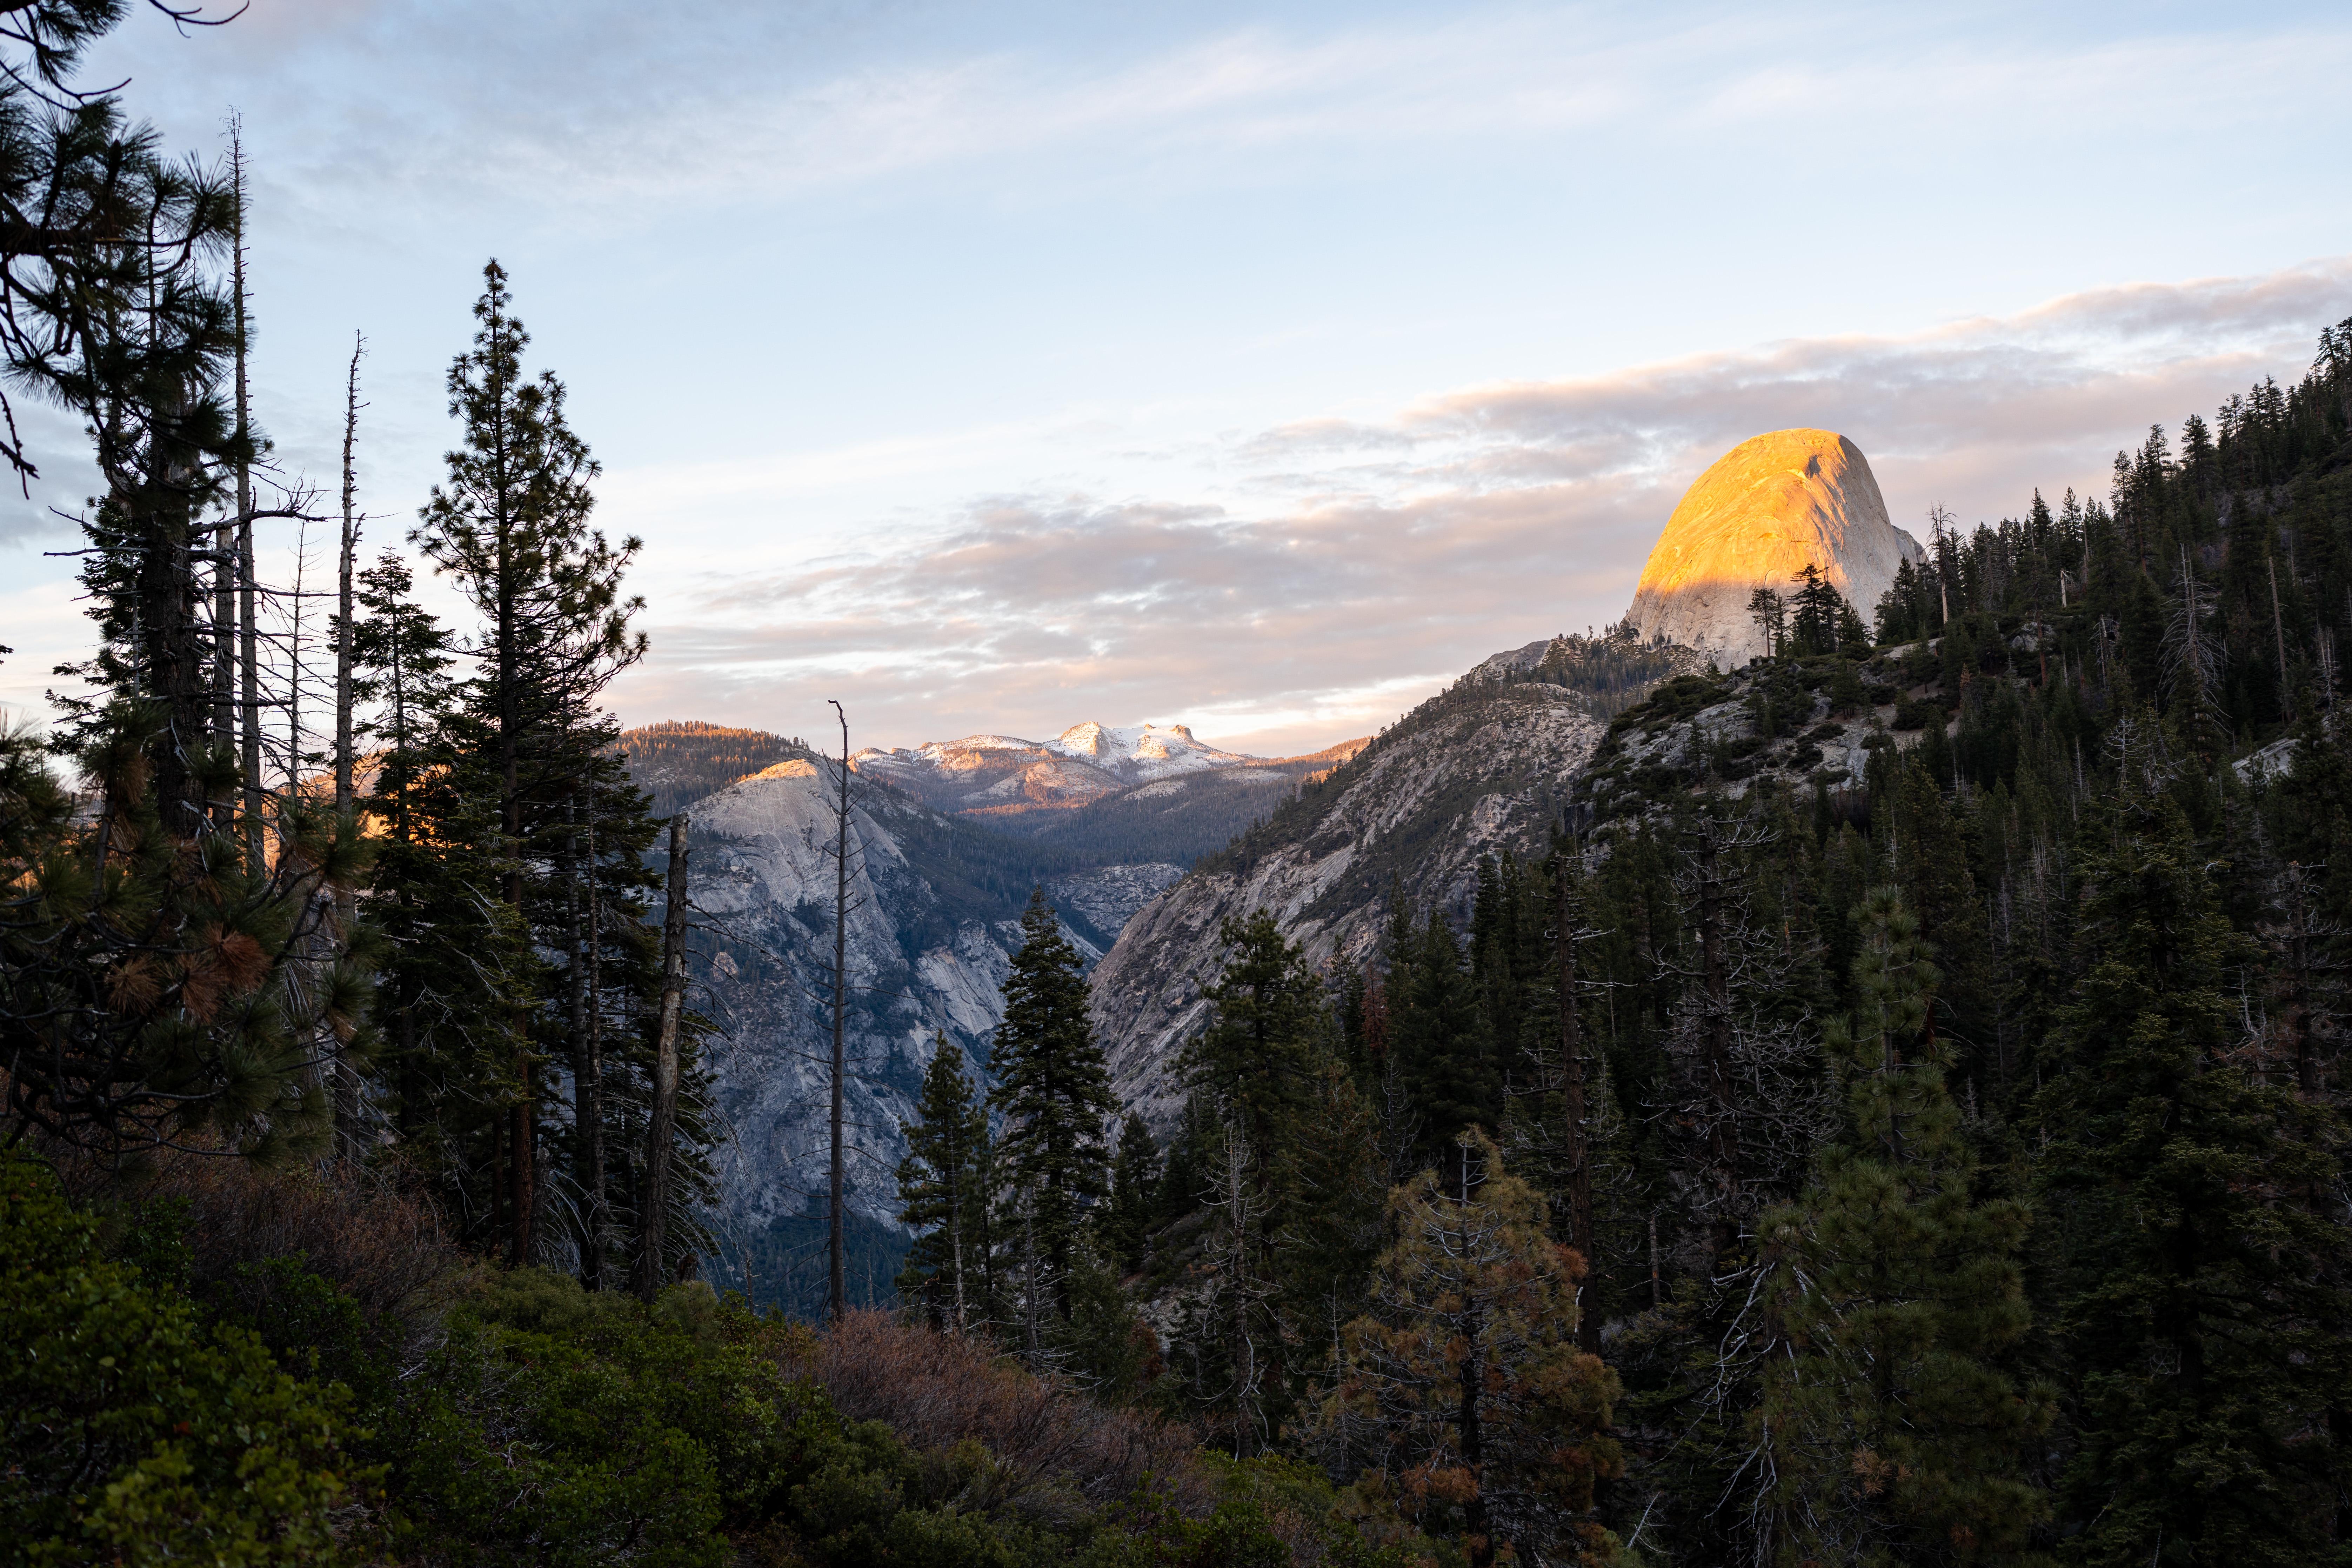 Forest Cliff Yosemite National Park USA Nature Landscape Valley Winter Sunset Clouds Mountains 6704x4469